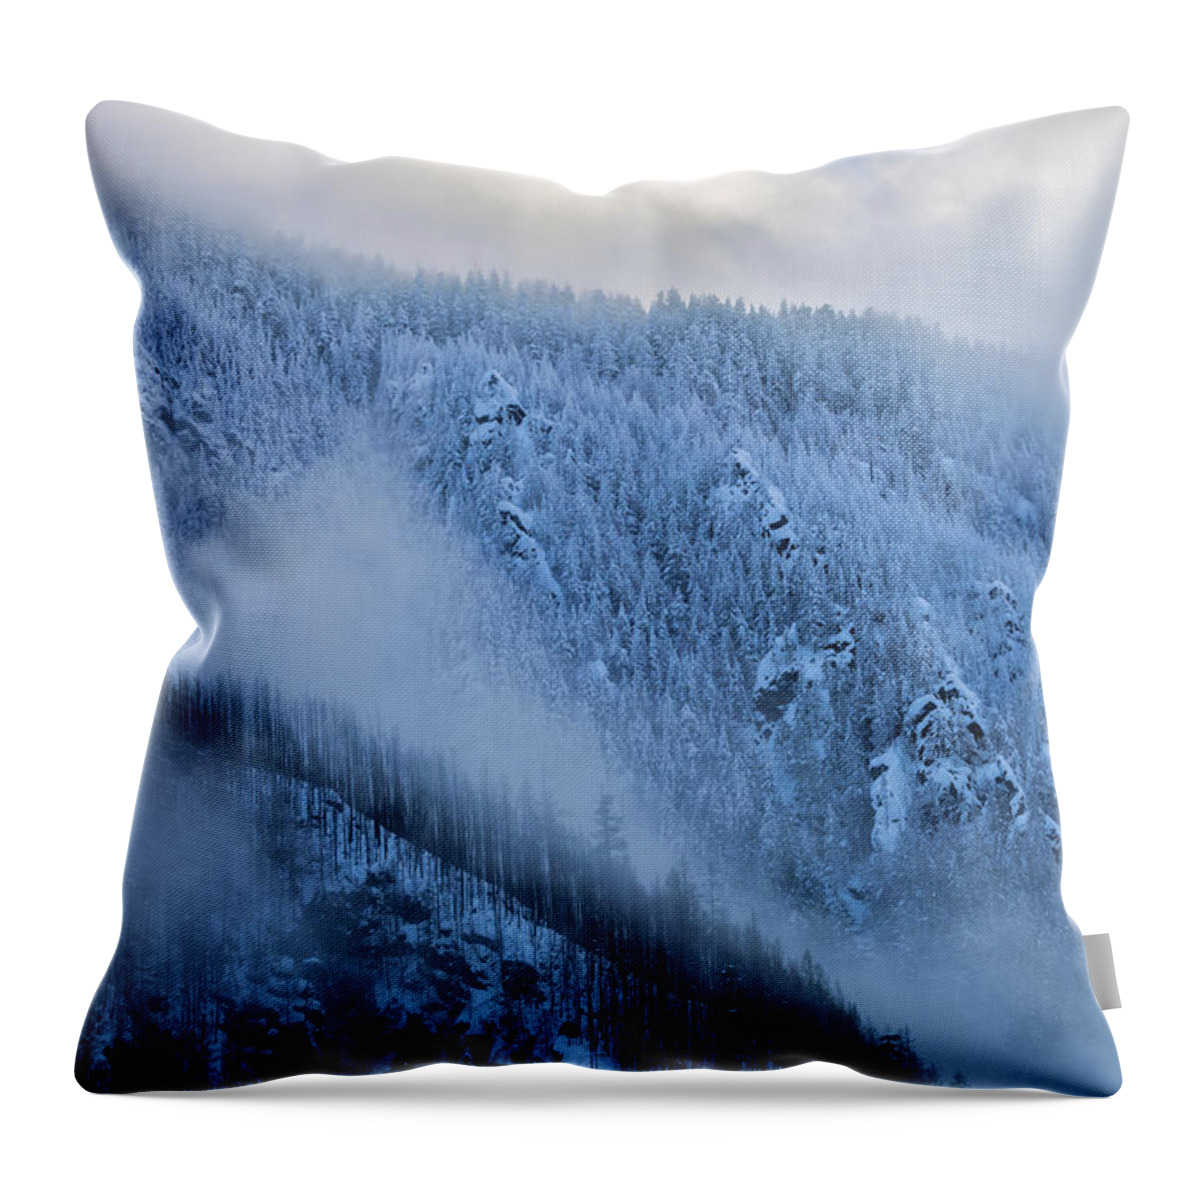 Landscape Throw Pillow featuring the photograph Winter On The Cascade by Jonathan Nguyen